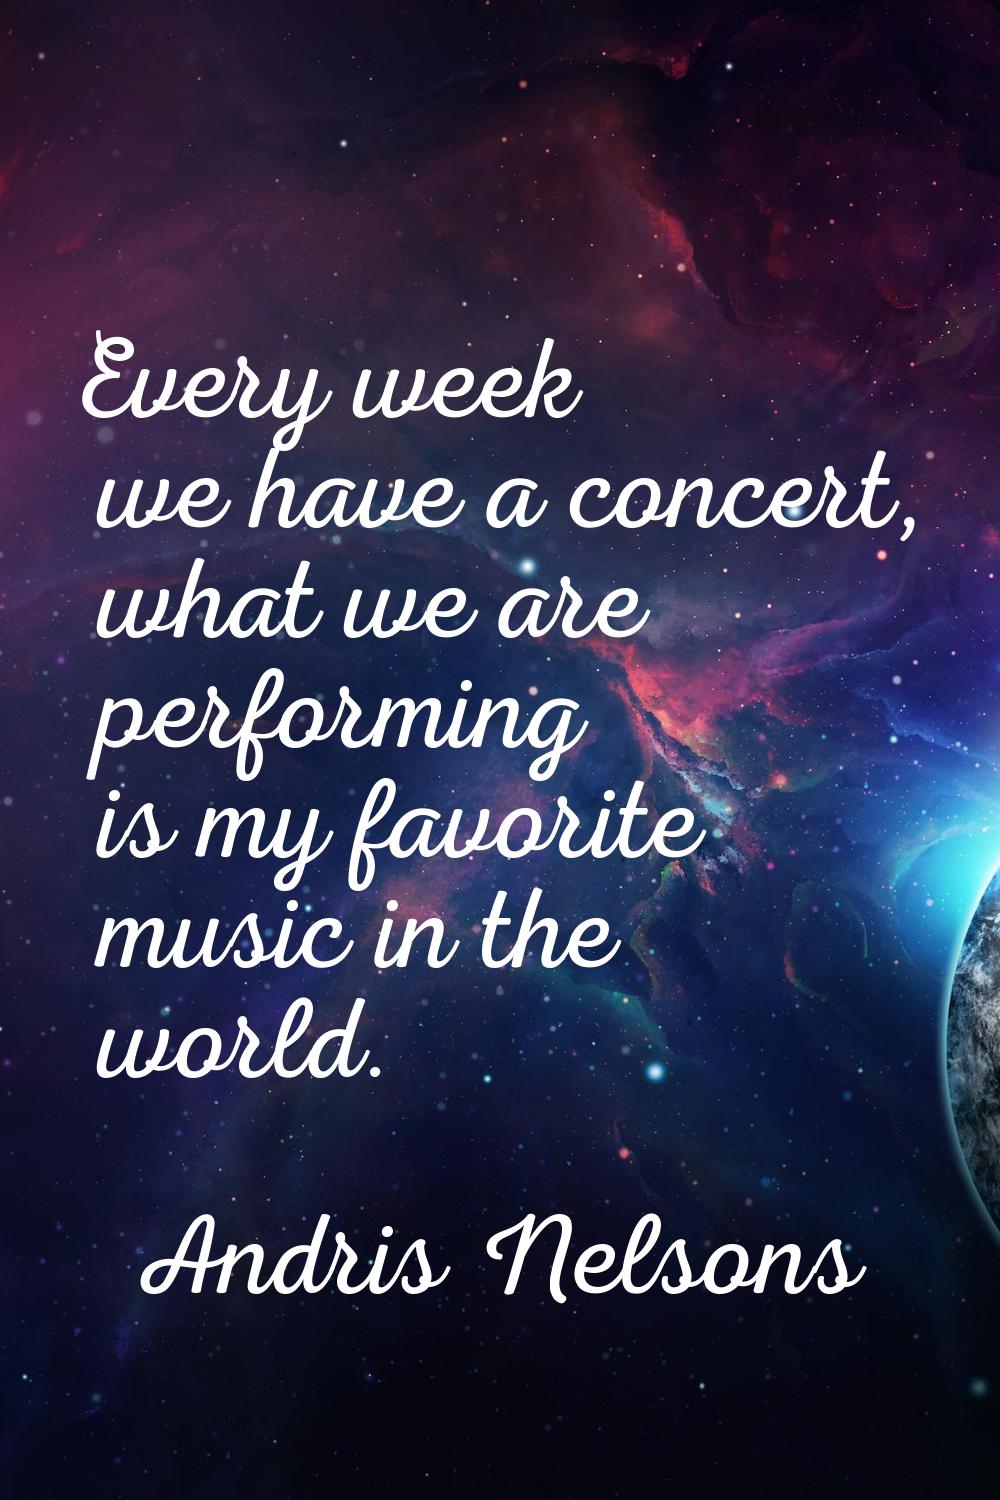 Every week we have a concert, what we are performing is my favorite music in the world.